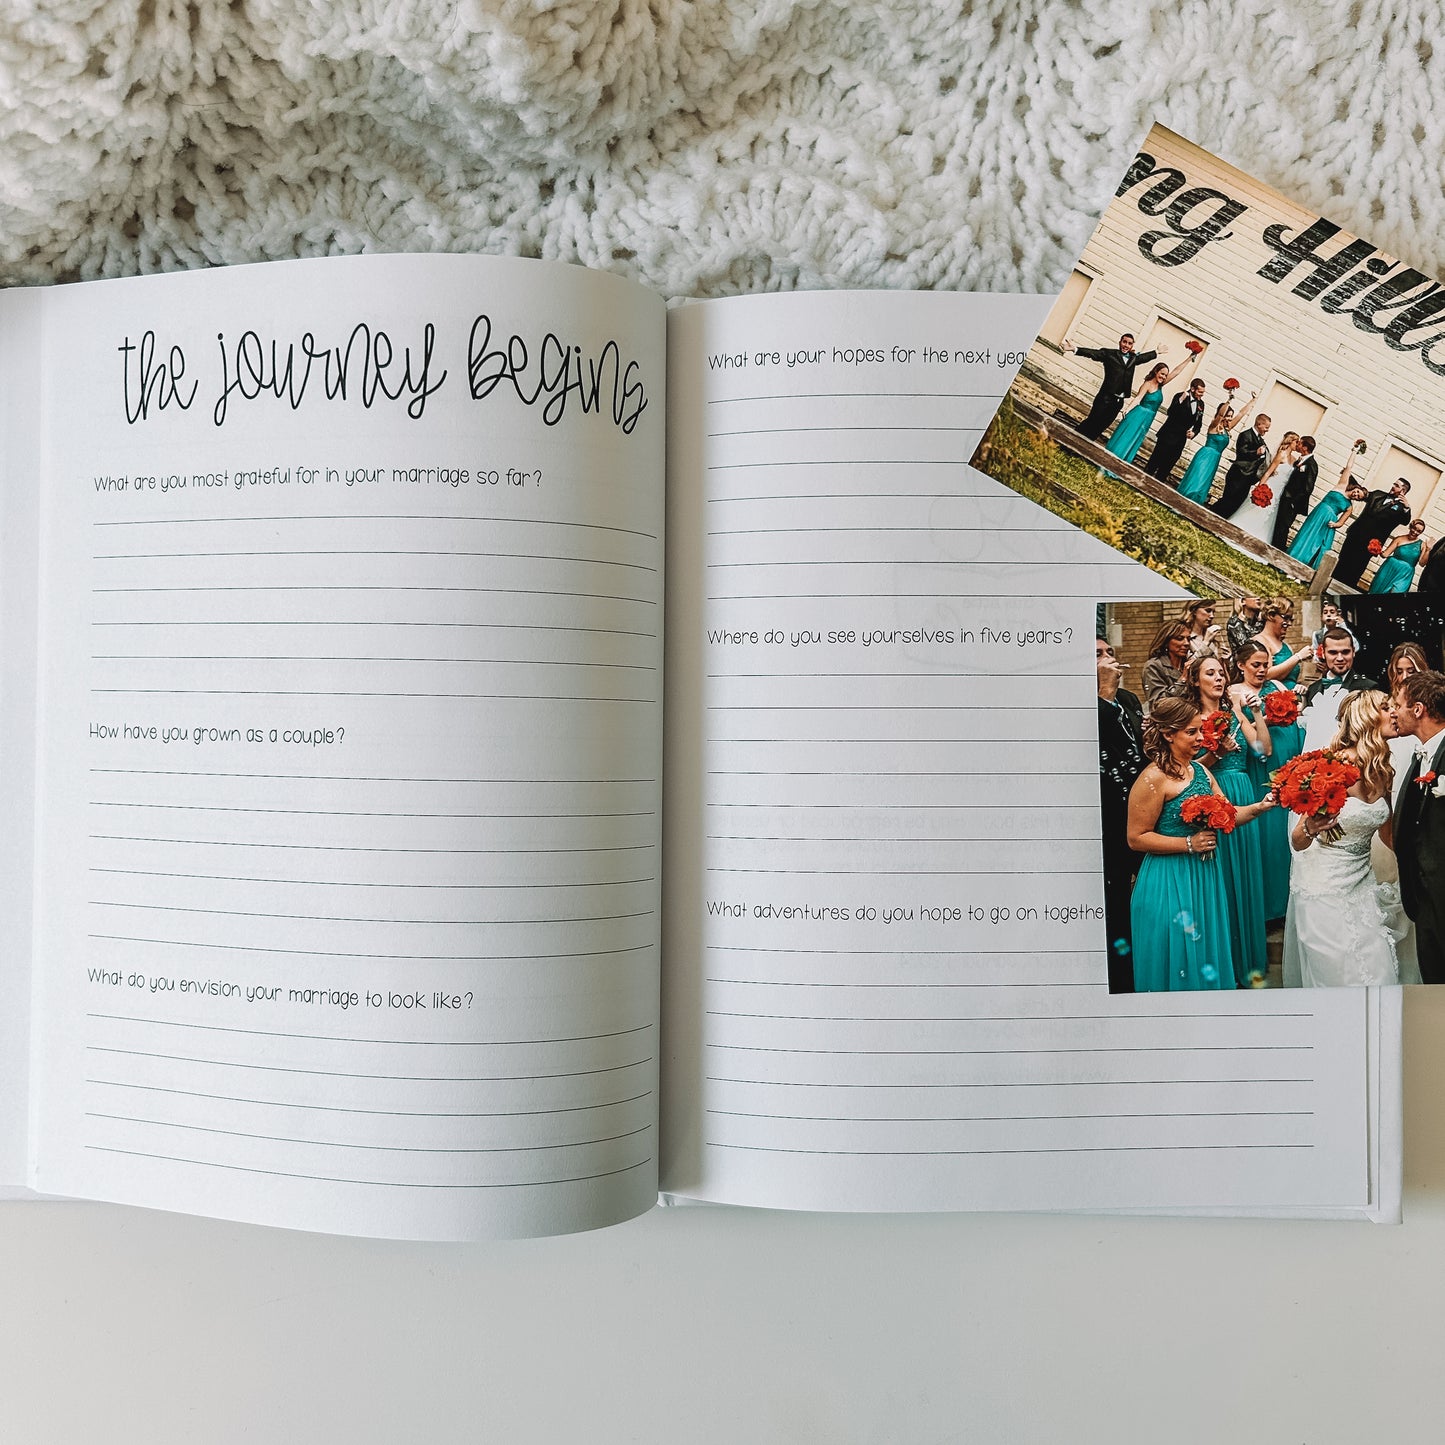 Two page spread in prompted engagement journal. Left page is titled the journey begins with prompts and blank lines beneath each prompt. Right page has only prompts with blank lines beneath each prompt. Wedding photos lie next to the book.